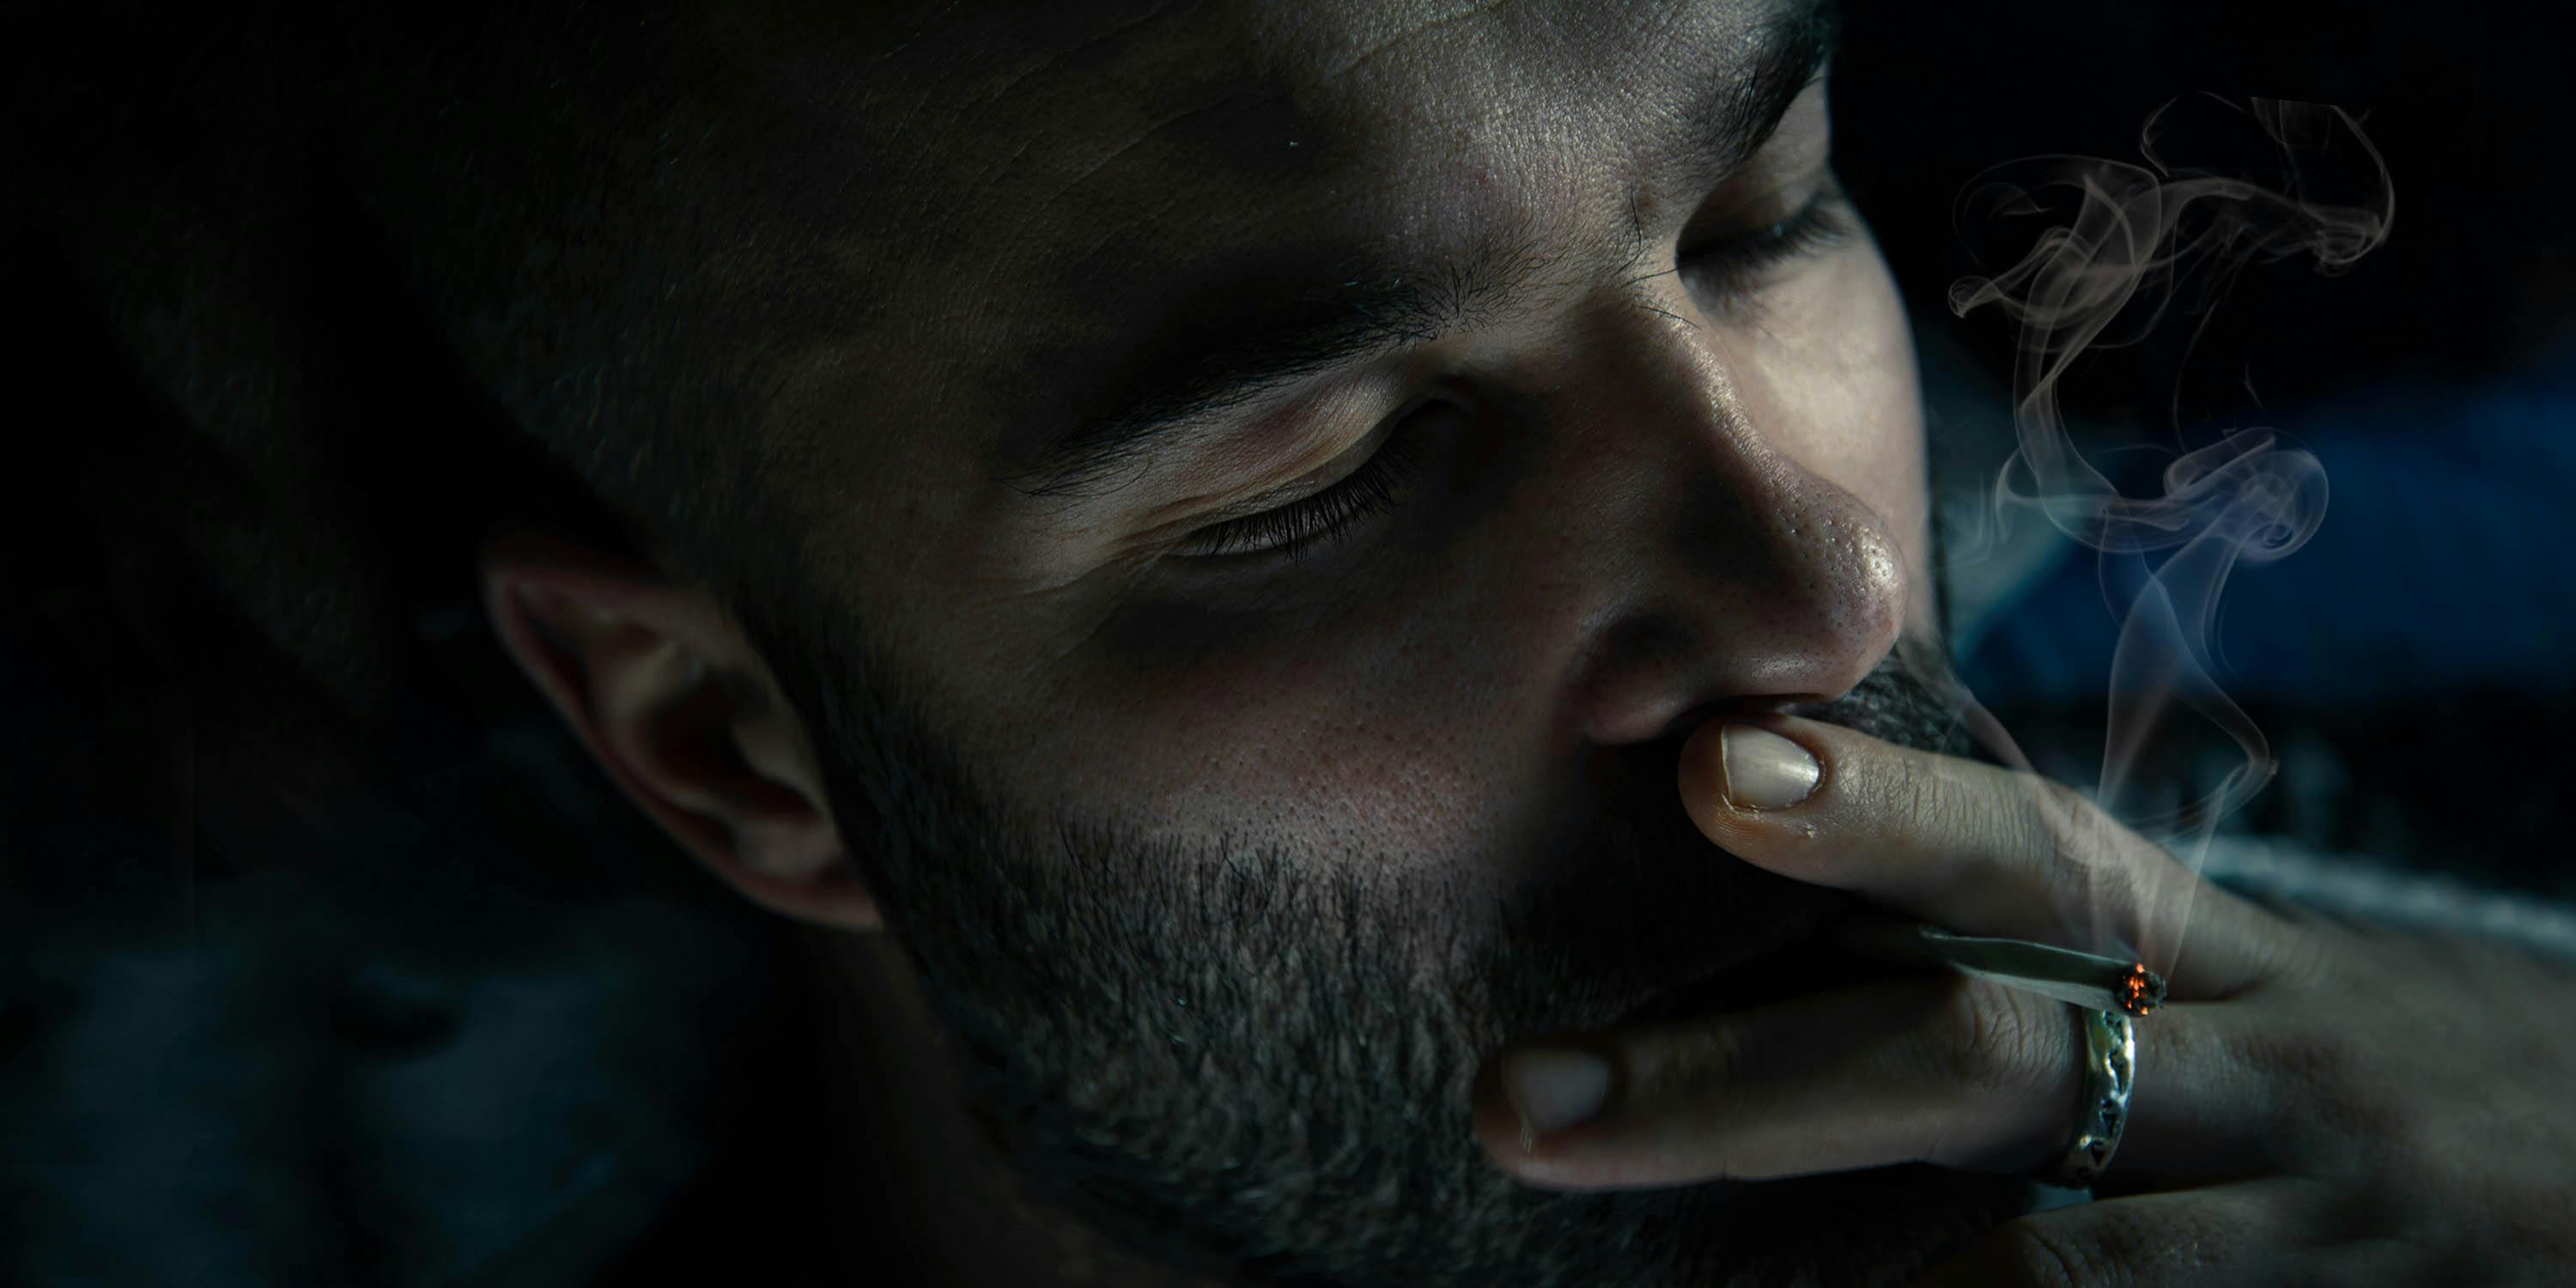 Close-up photo of mid-adult man smoking cigarette in the dark. He appears deep in thought, likely pondering one of life's many philosophical questions.